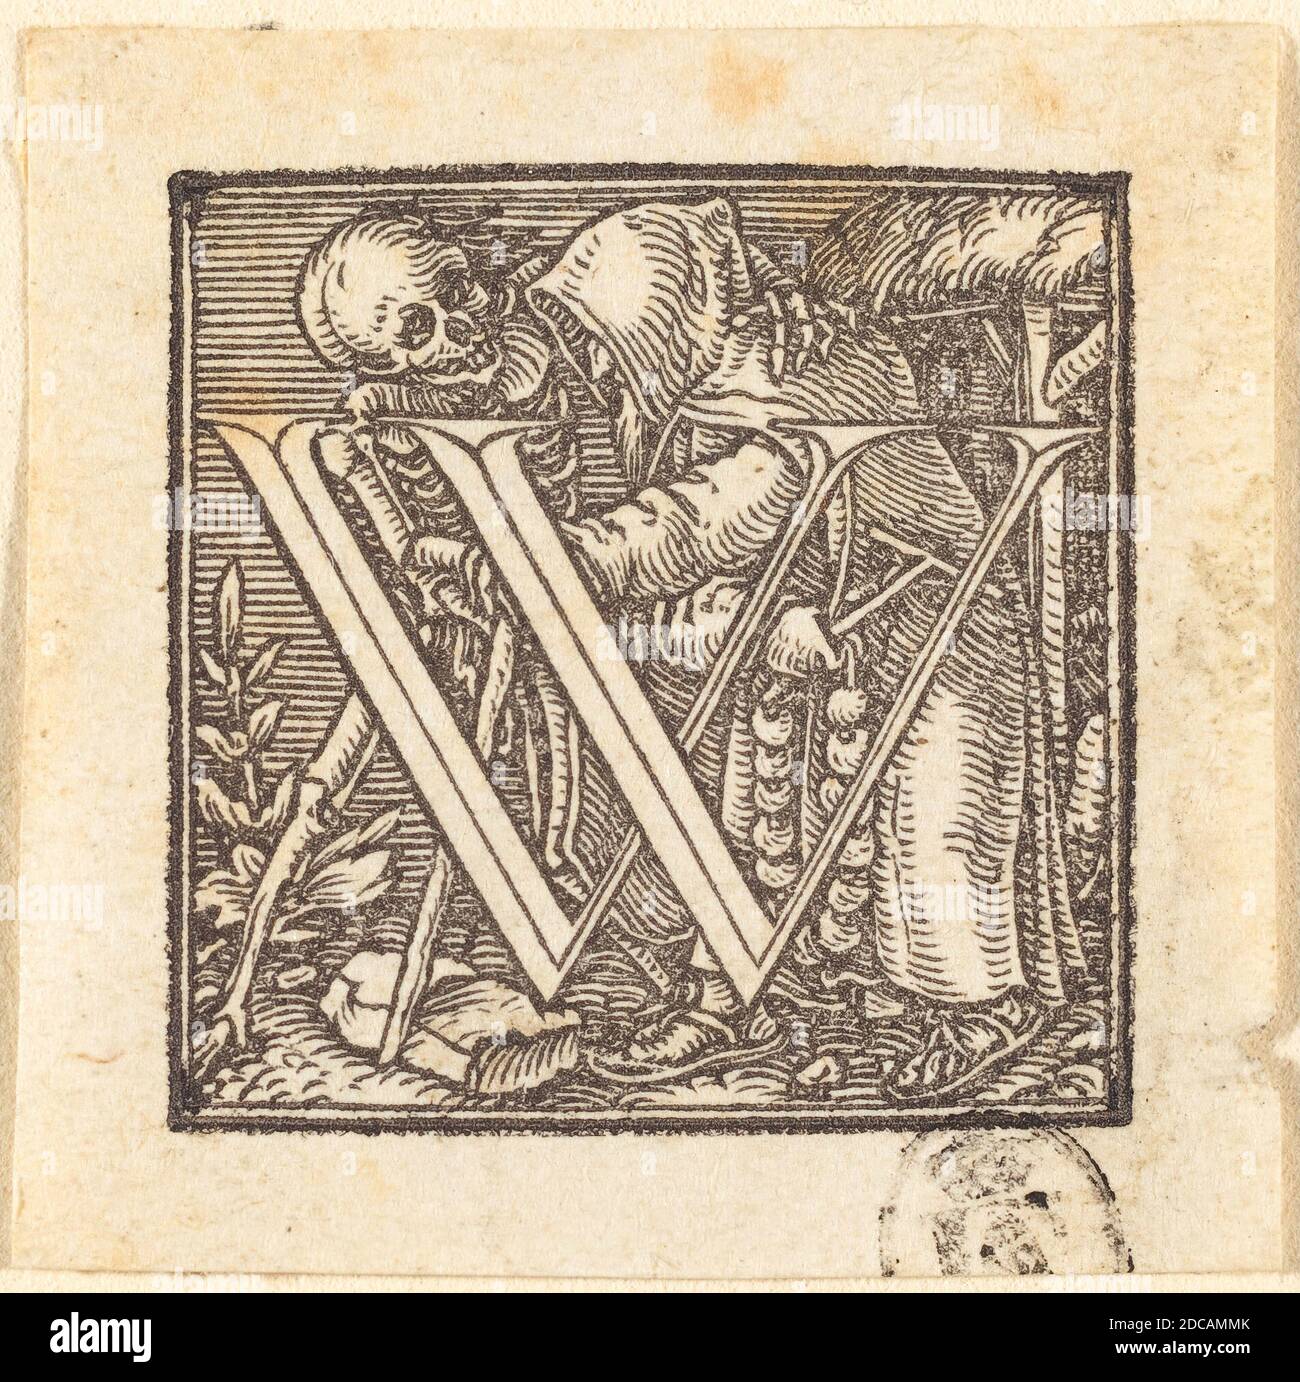 Hans Holbein the Younger, (artist), German, 1497/1498 - 1543, Letter W, Alphabet of Death, (series), woodcut Stock Photo